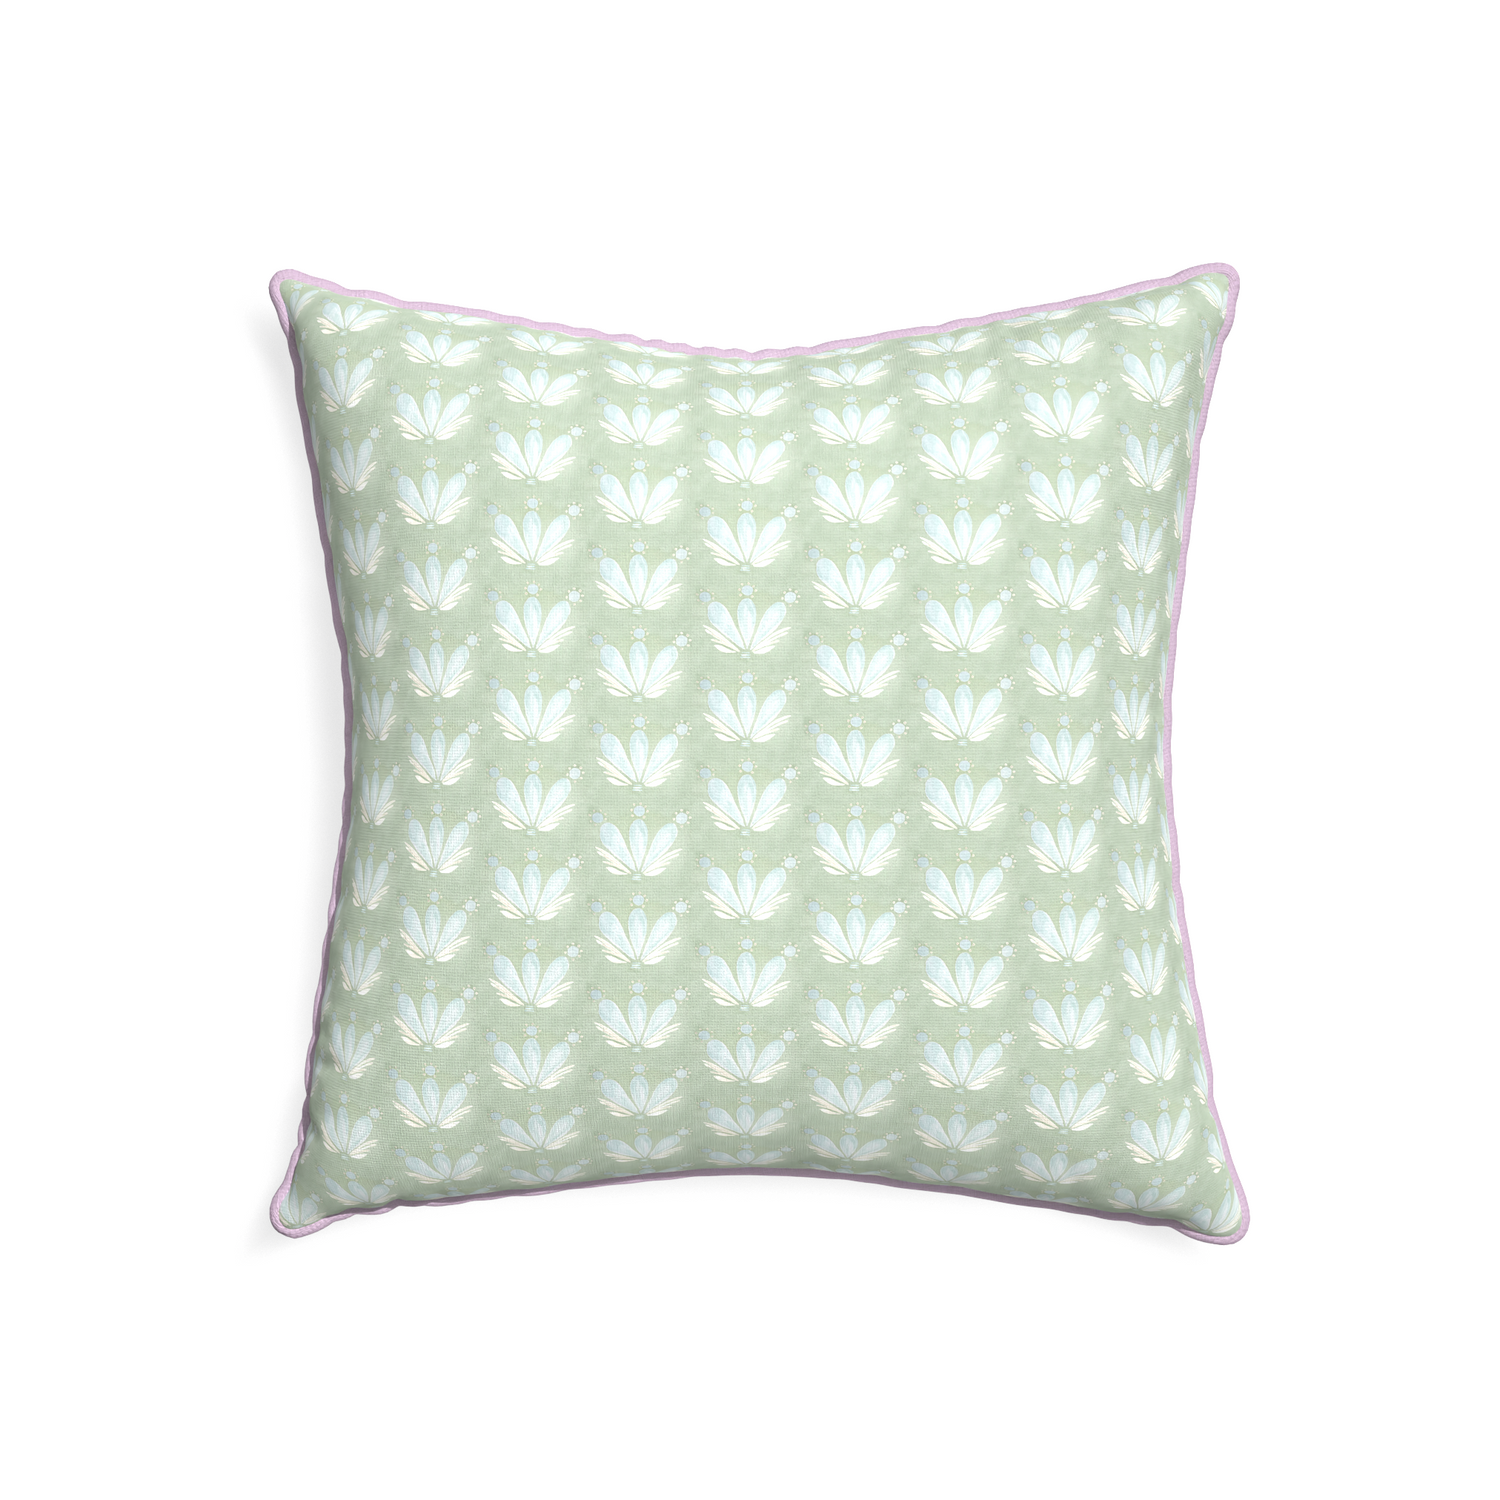 22-square serena sea salt custom blue & green floral drop repeatpillow with l piping on white background